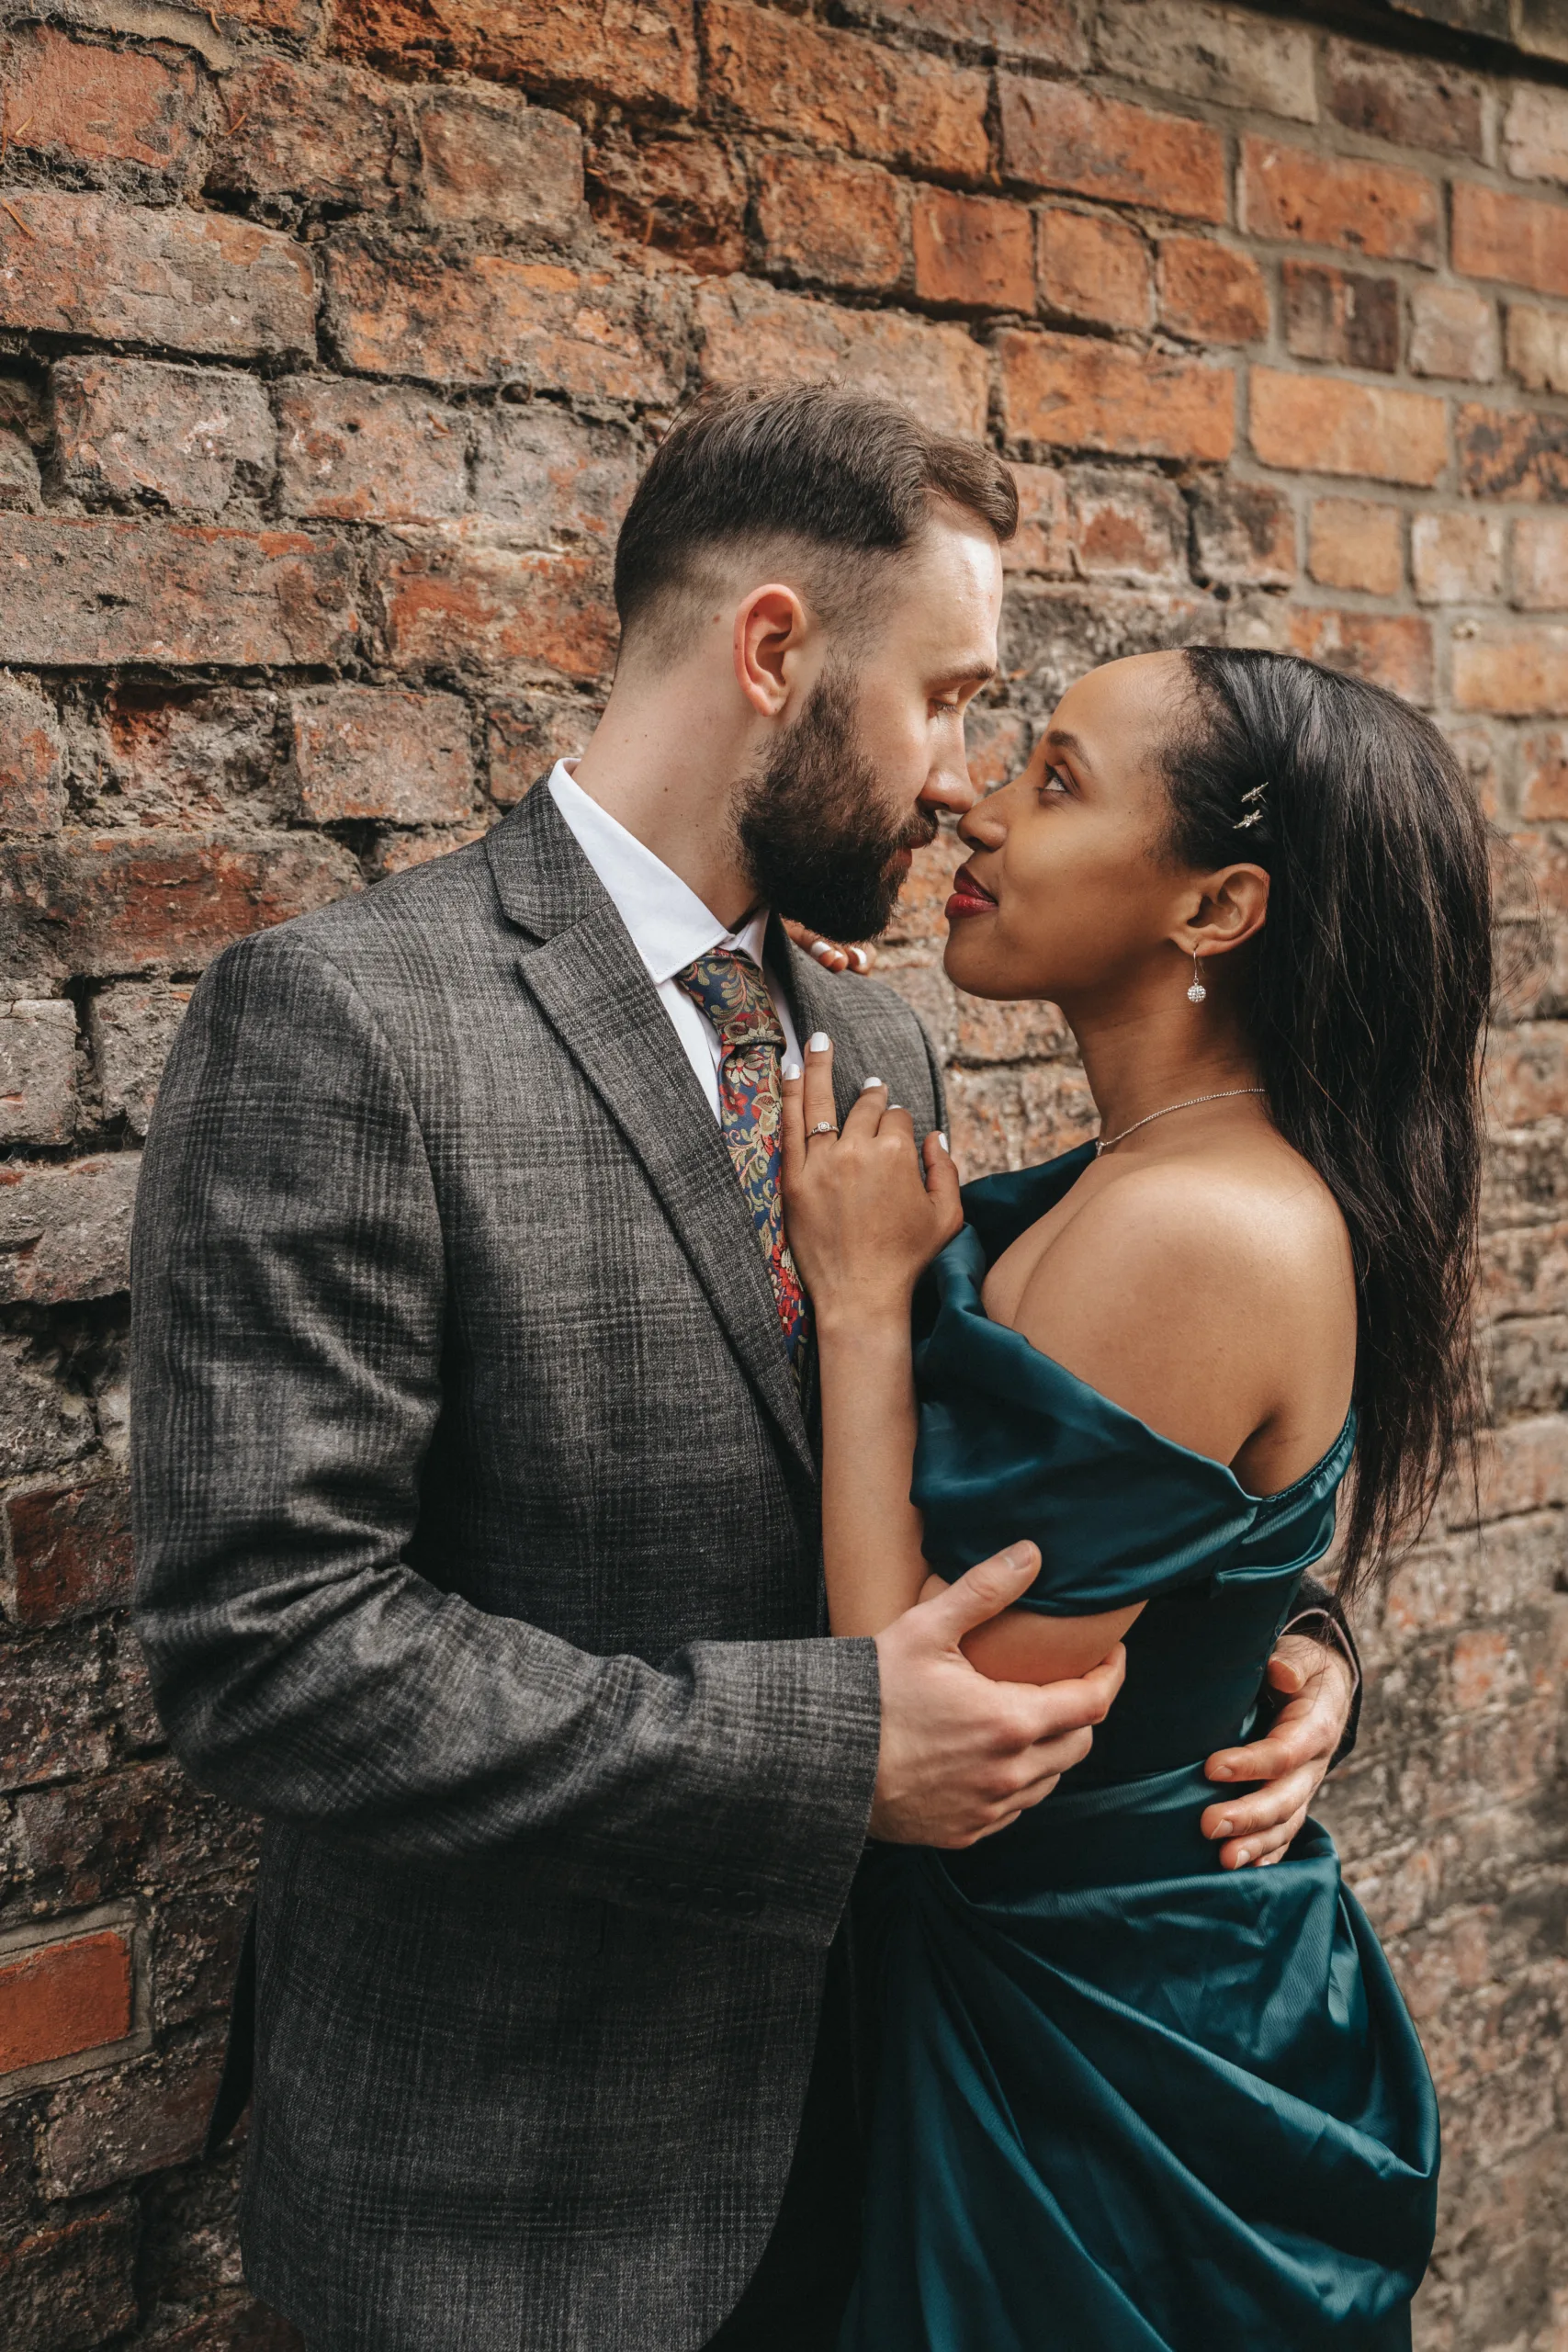 A man and woman embrace in front of a brick wall in Yorkshire.